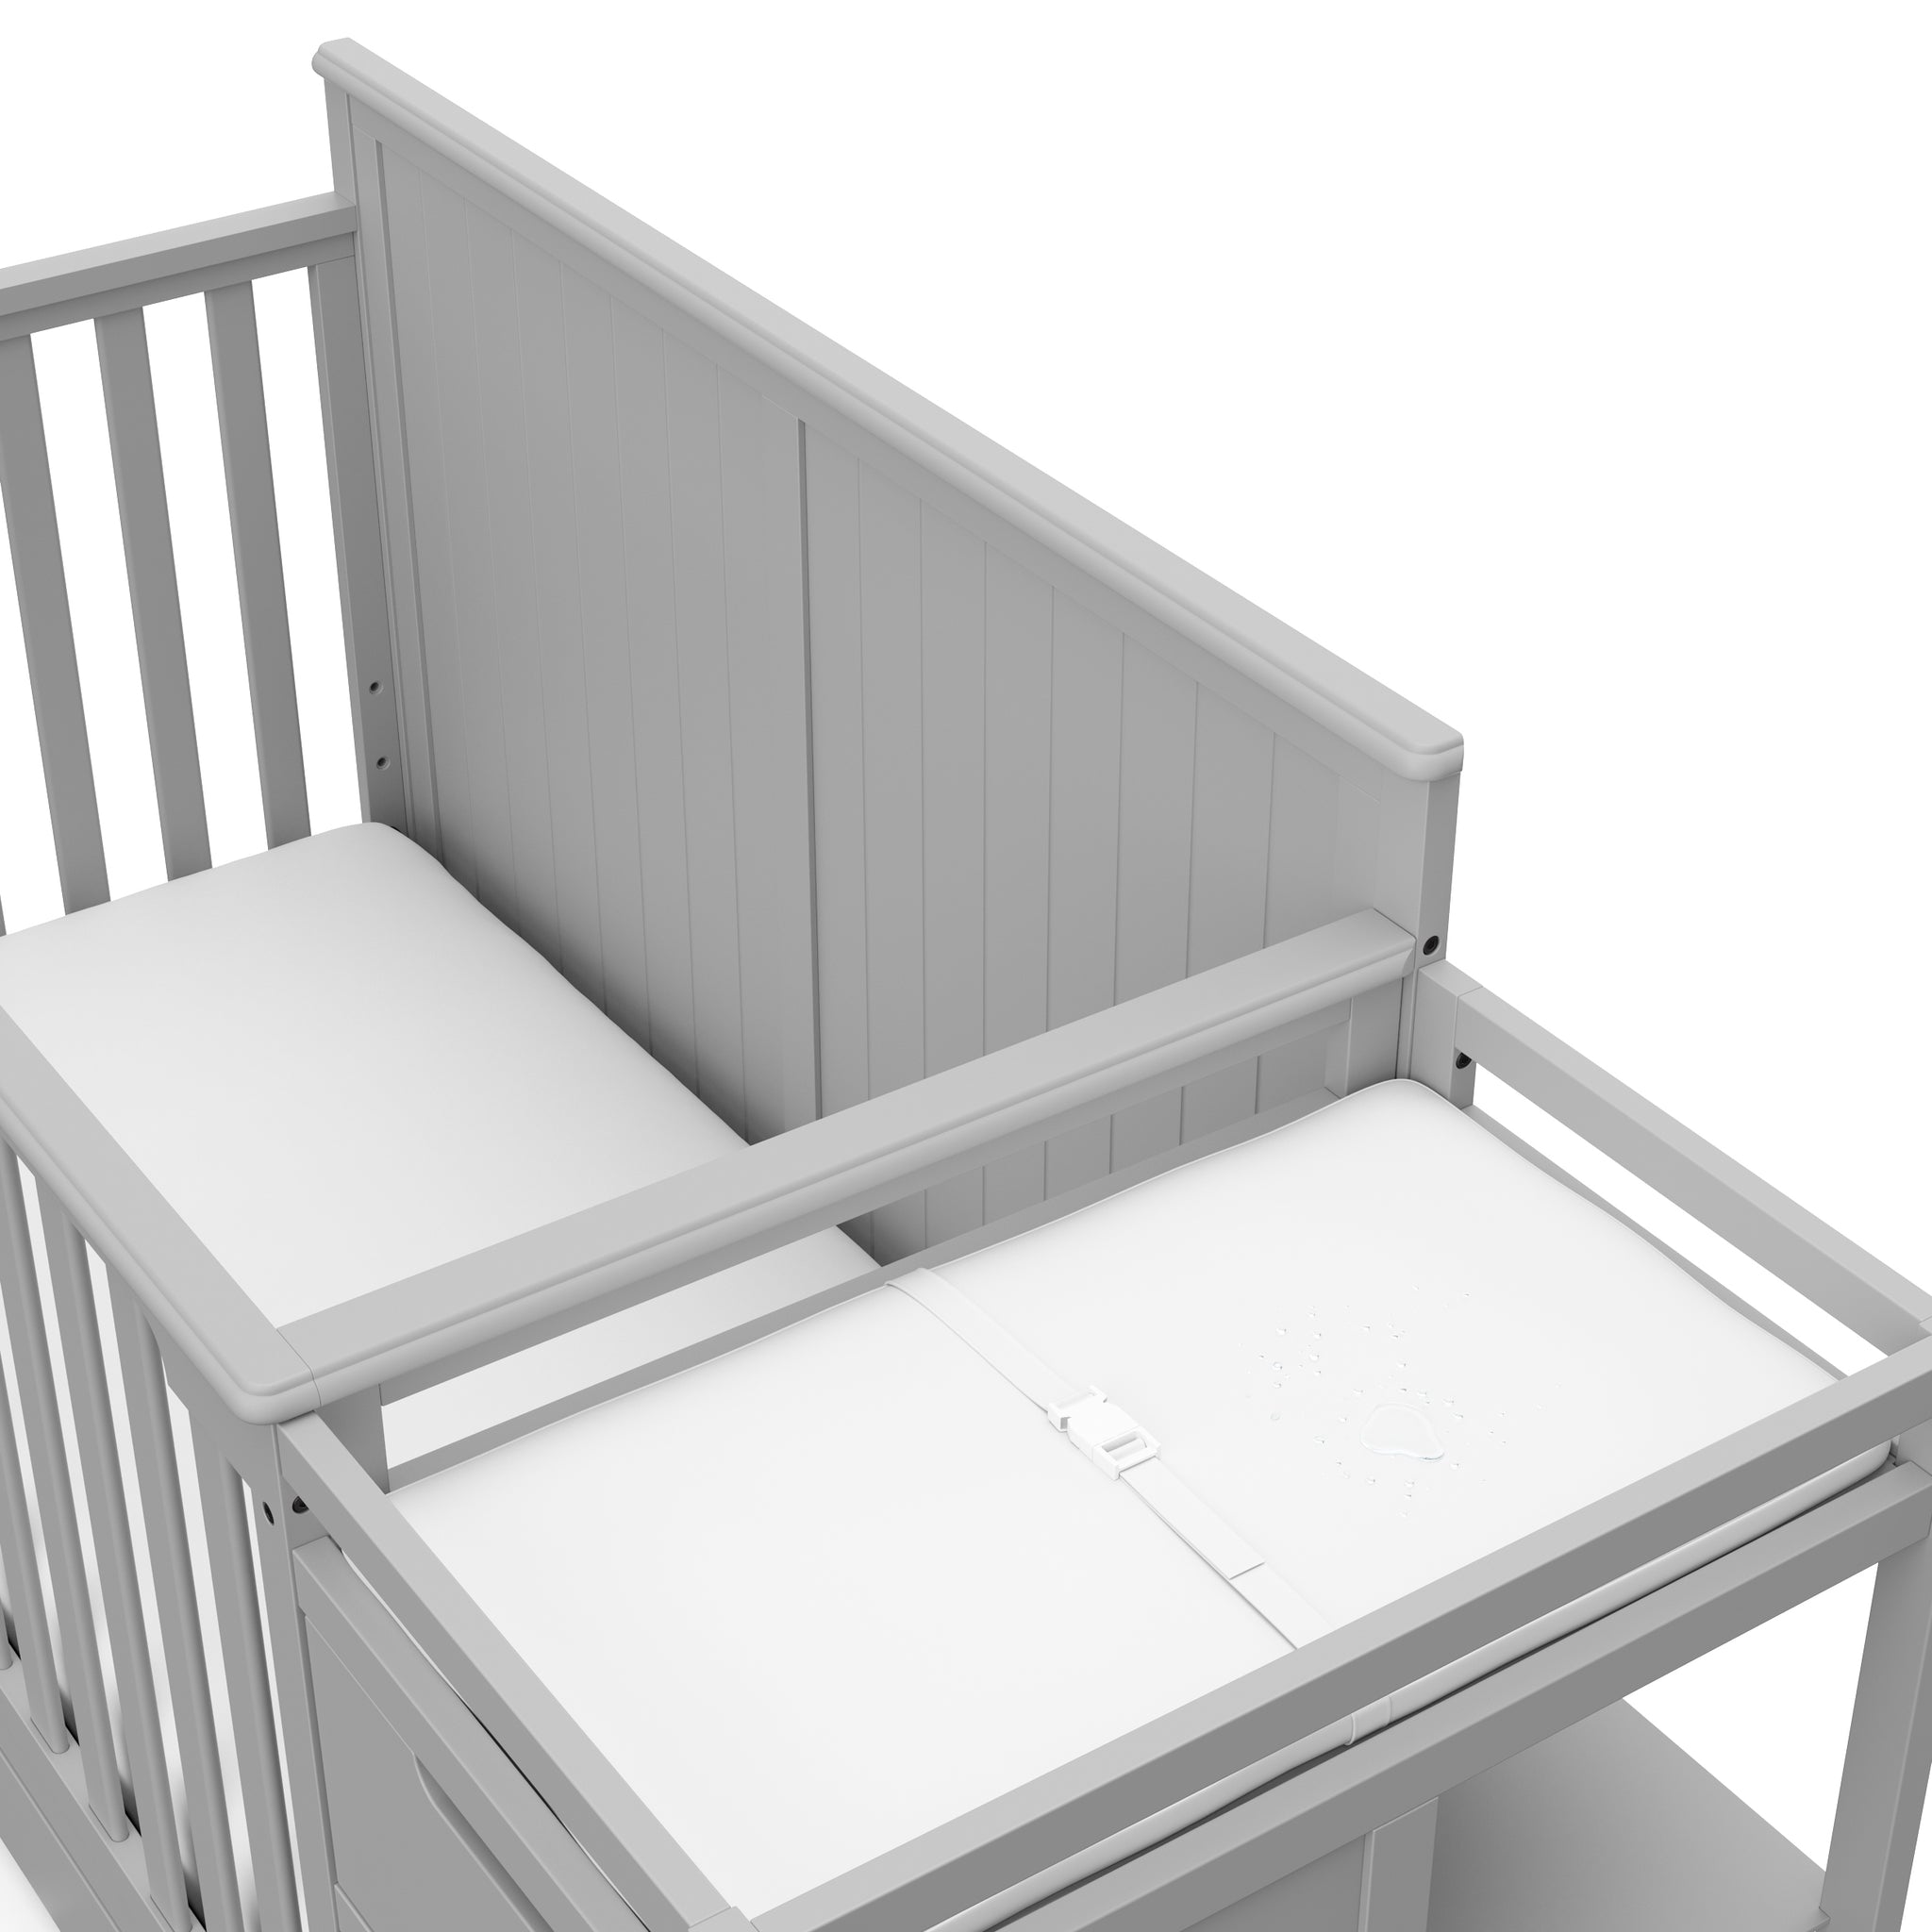 Close-up view of Pebble gray crib and changer with drawer